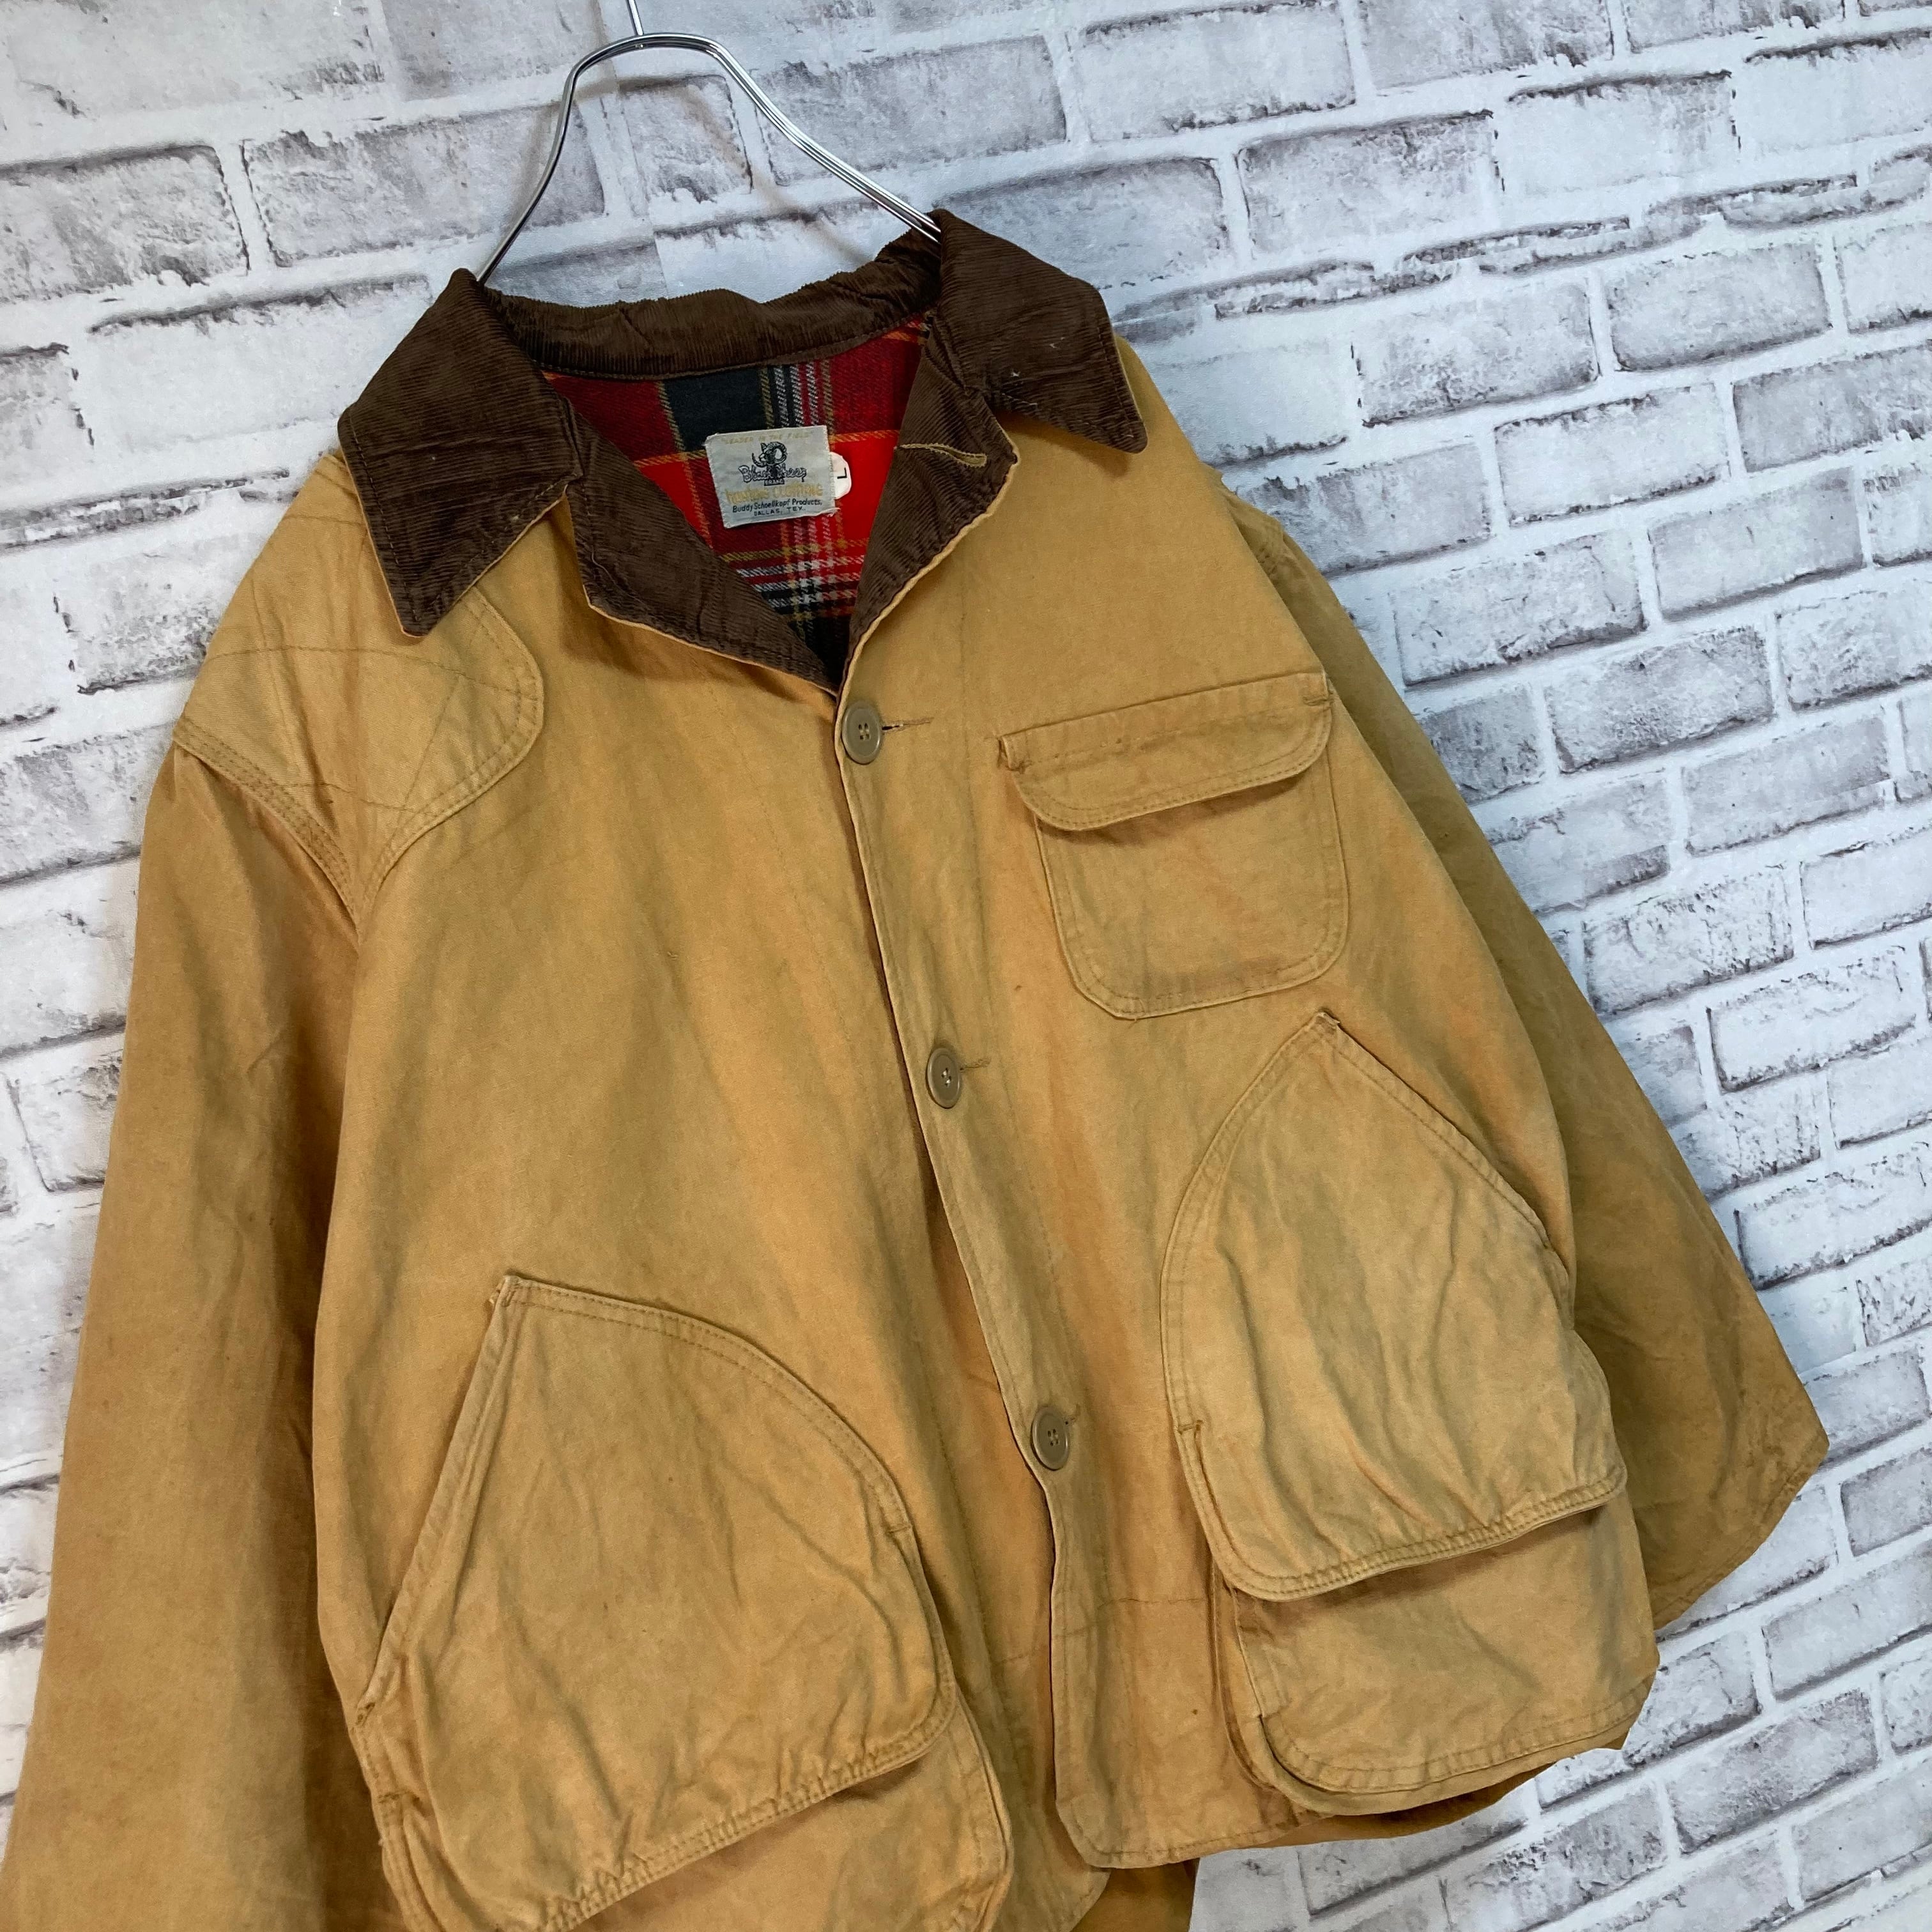 Black Sheep】Hunting Jacket L 70s Made in USA ブラックシープ ...